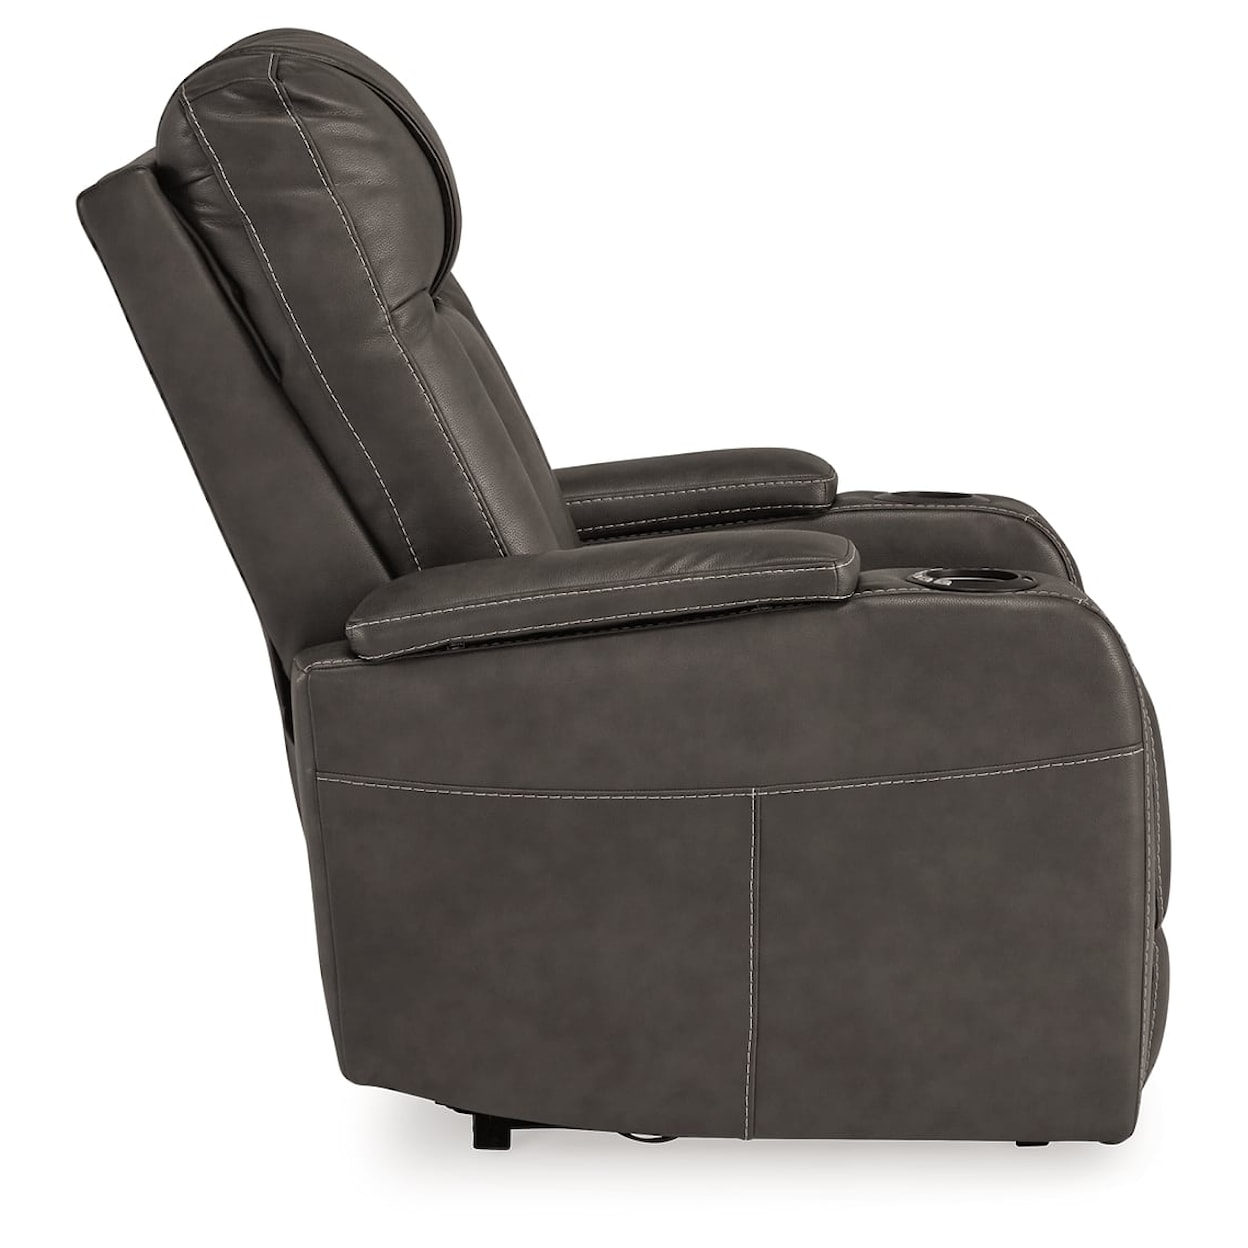 Signature Design by Ashley Feazada Power Recliner